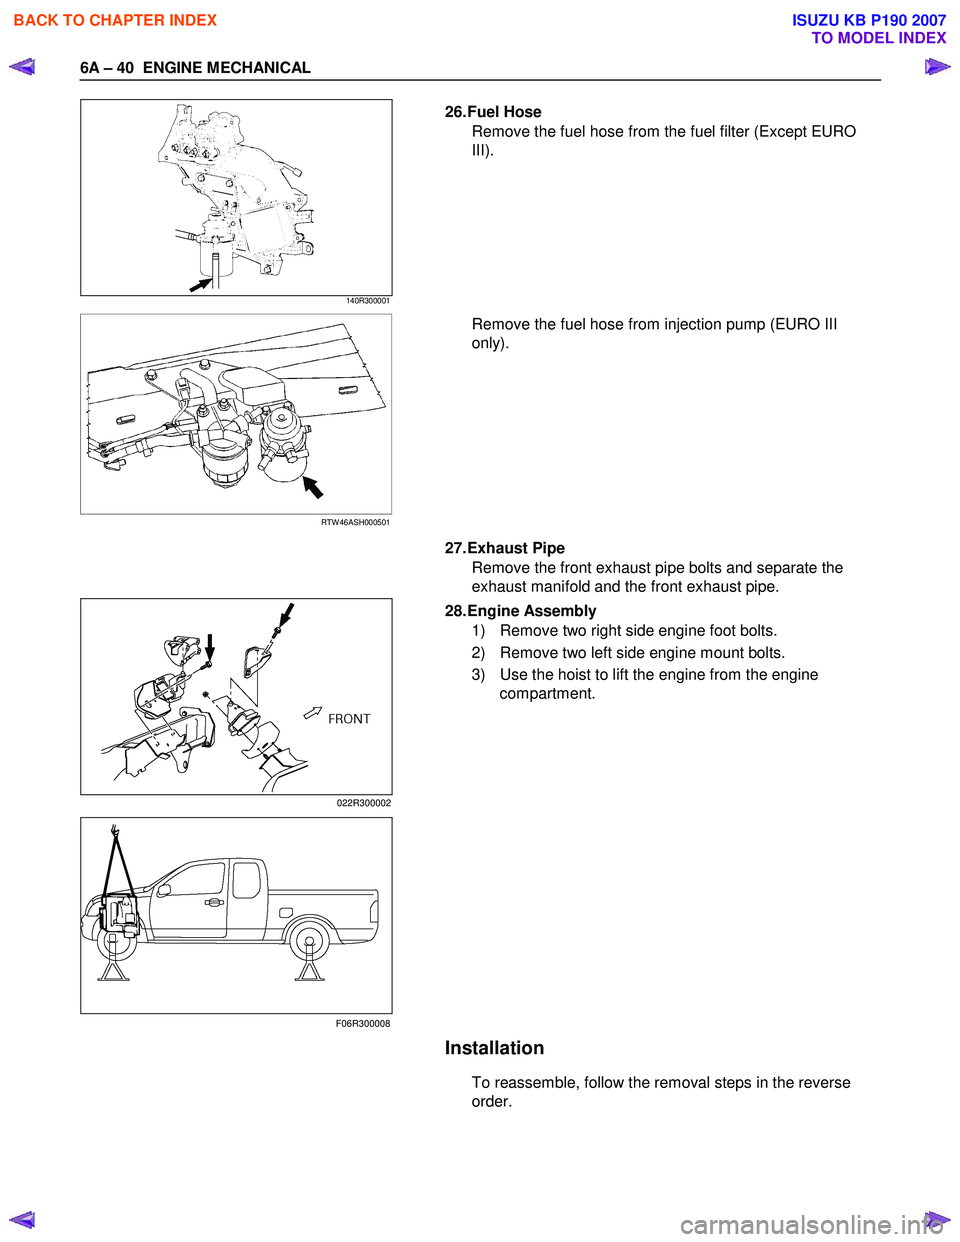 ISUZU KB P190 2007  Workshop Repair Manual 6A – 40  ENGINE MECHANICAL 
 140R300001   
26. Fuel  Hose 
Remove the fuel hose from the fuel filter (Except EURO  
III). 
 
  
 
 
RTW 46ASH000501   
Remove the fuel hose from injection pump (EURO 